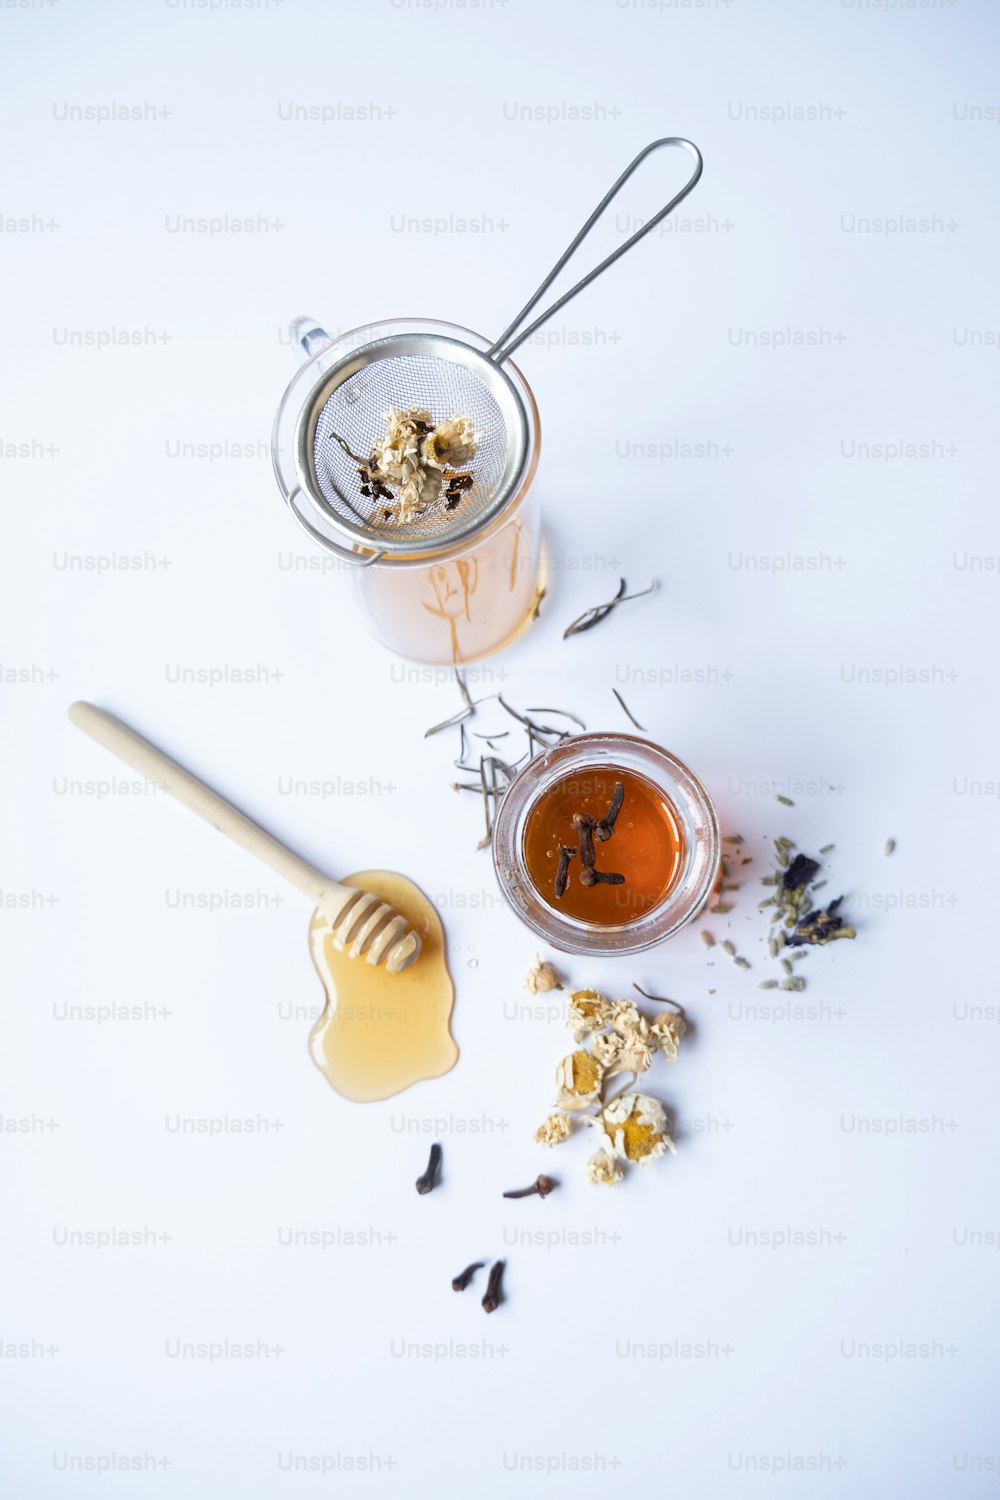 a jar of honey and a spoon of honey on a white surface